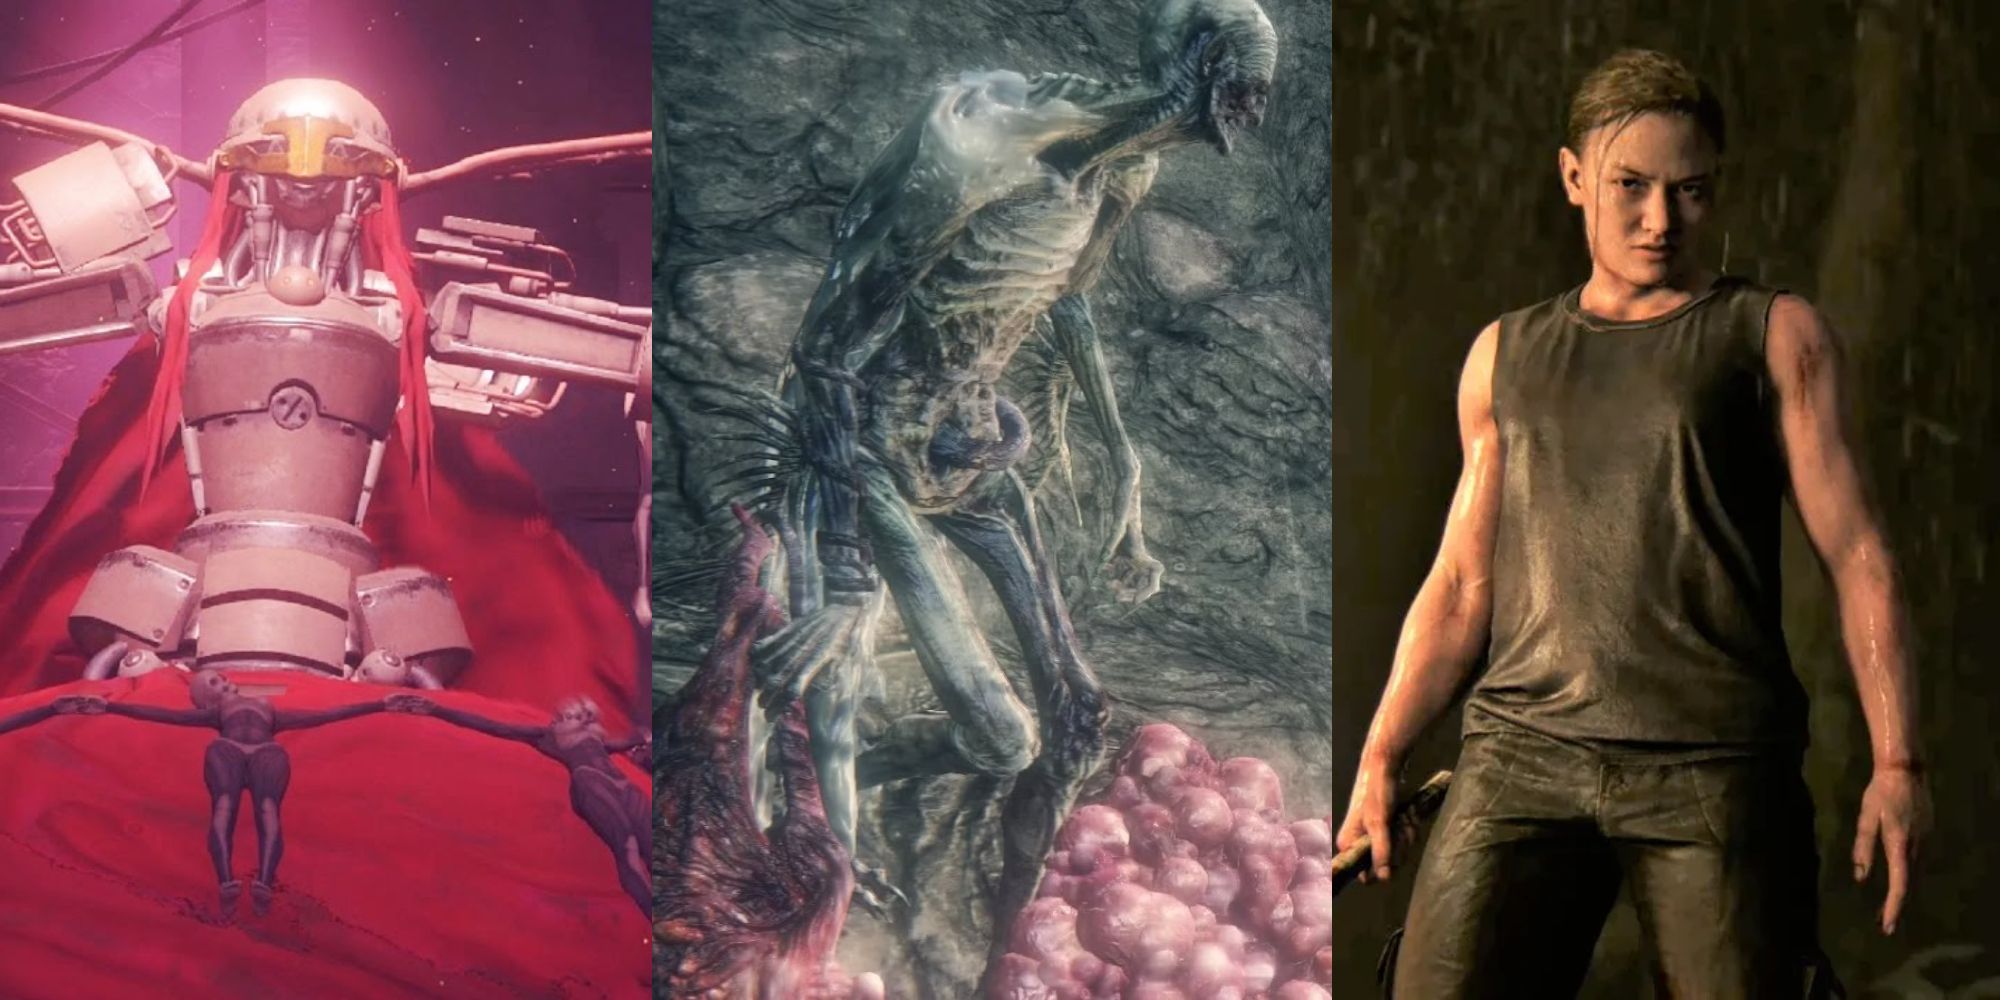 Split image: Opera Boss from NieR, Ophan of Kos from Bloodborne, and Abby from TLOU Part 2